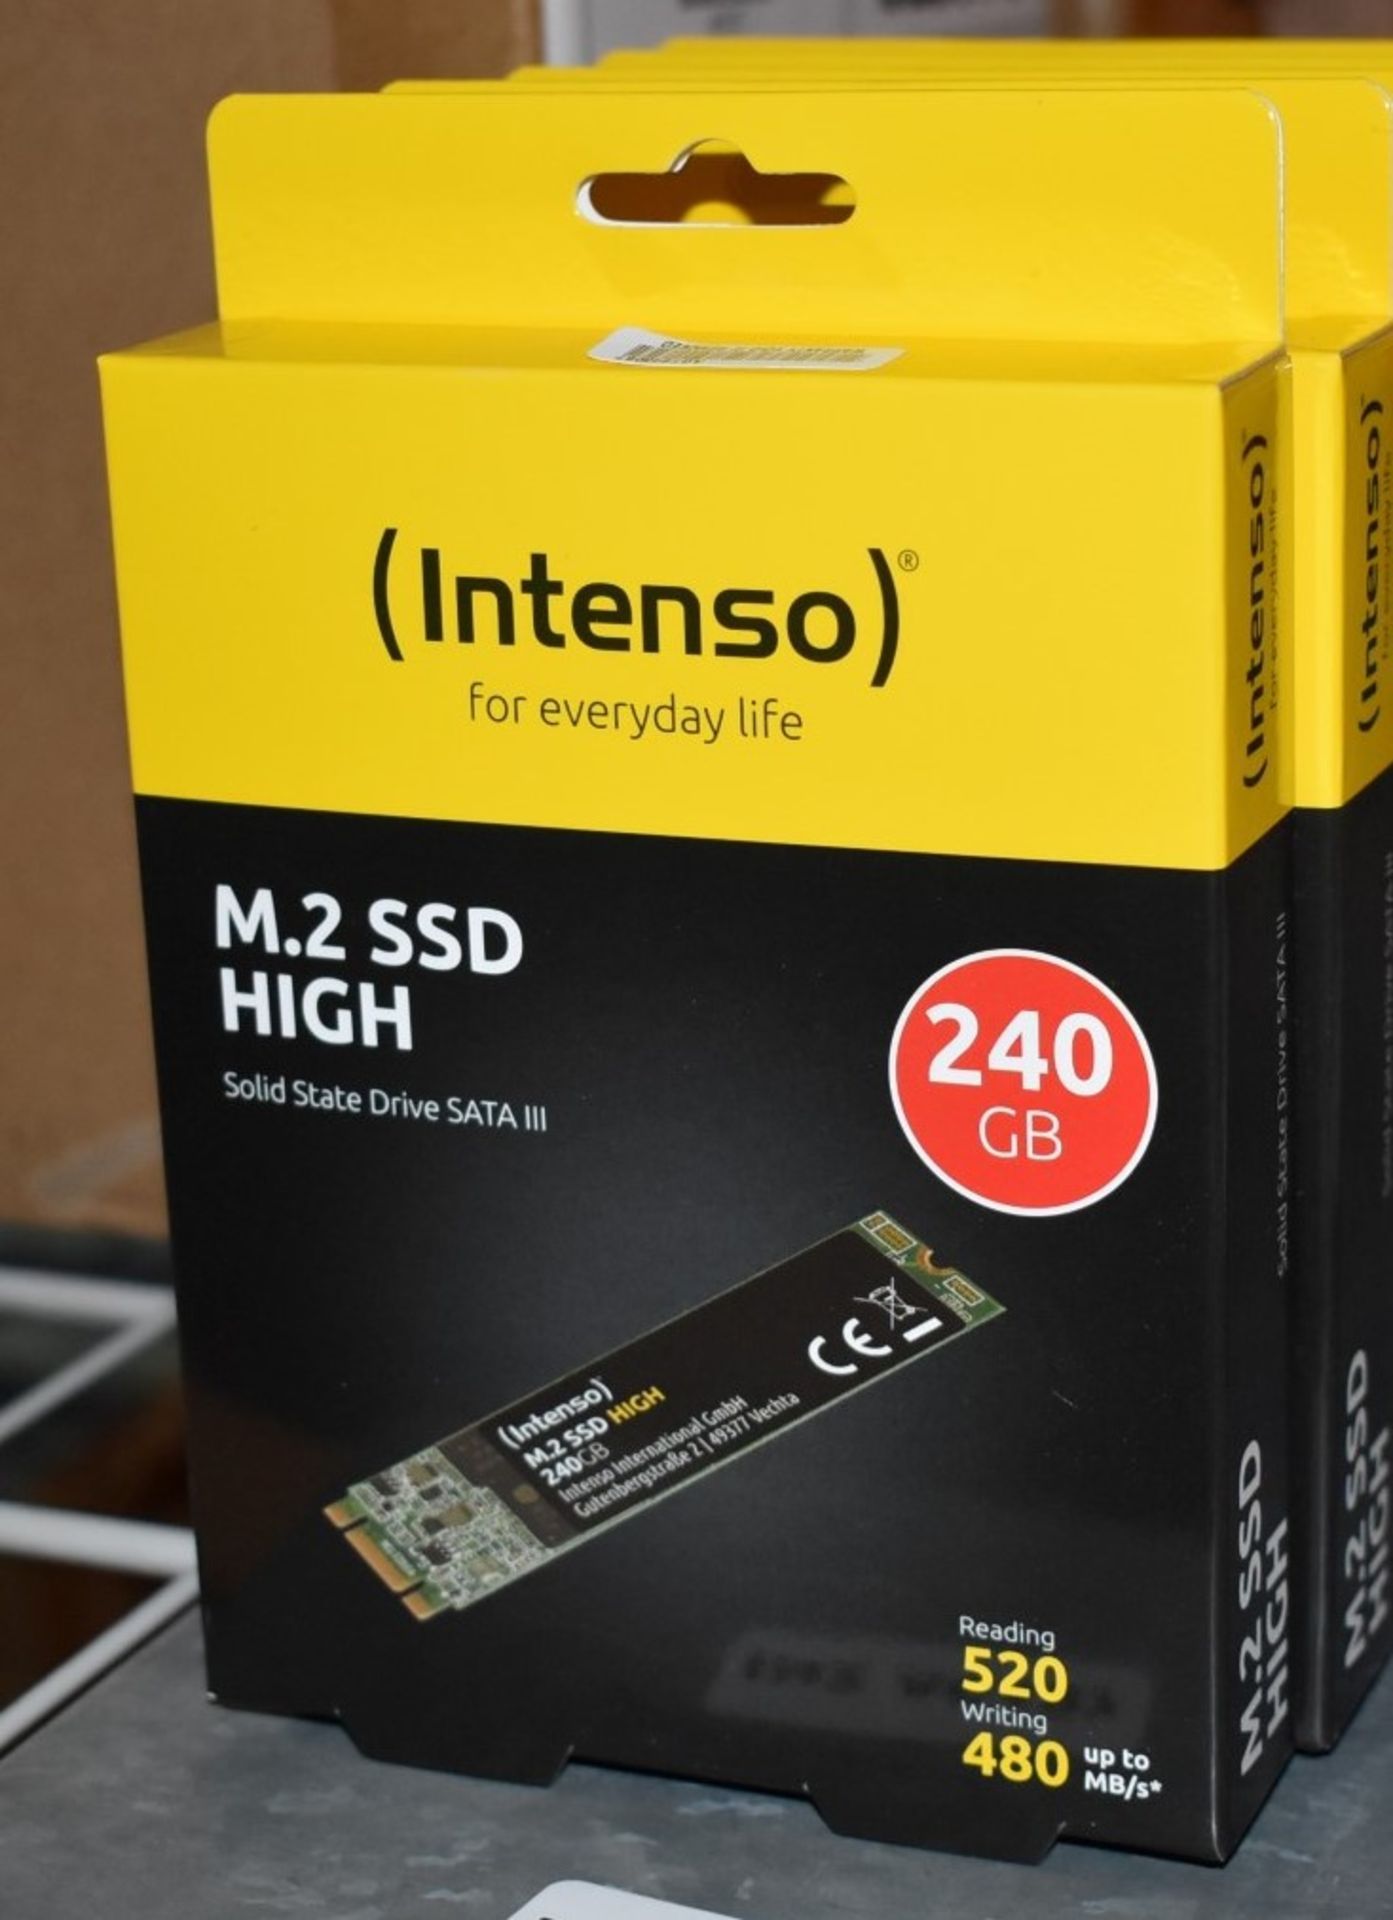 1 x Intenso M.2 Solid State 240GB SSD Hard Drive - New Boxed Stock - CL882 - Location: Altrincham - Image 2 of 3